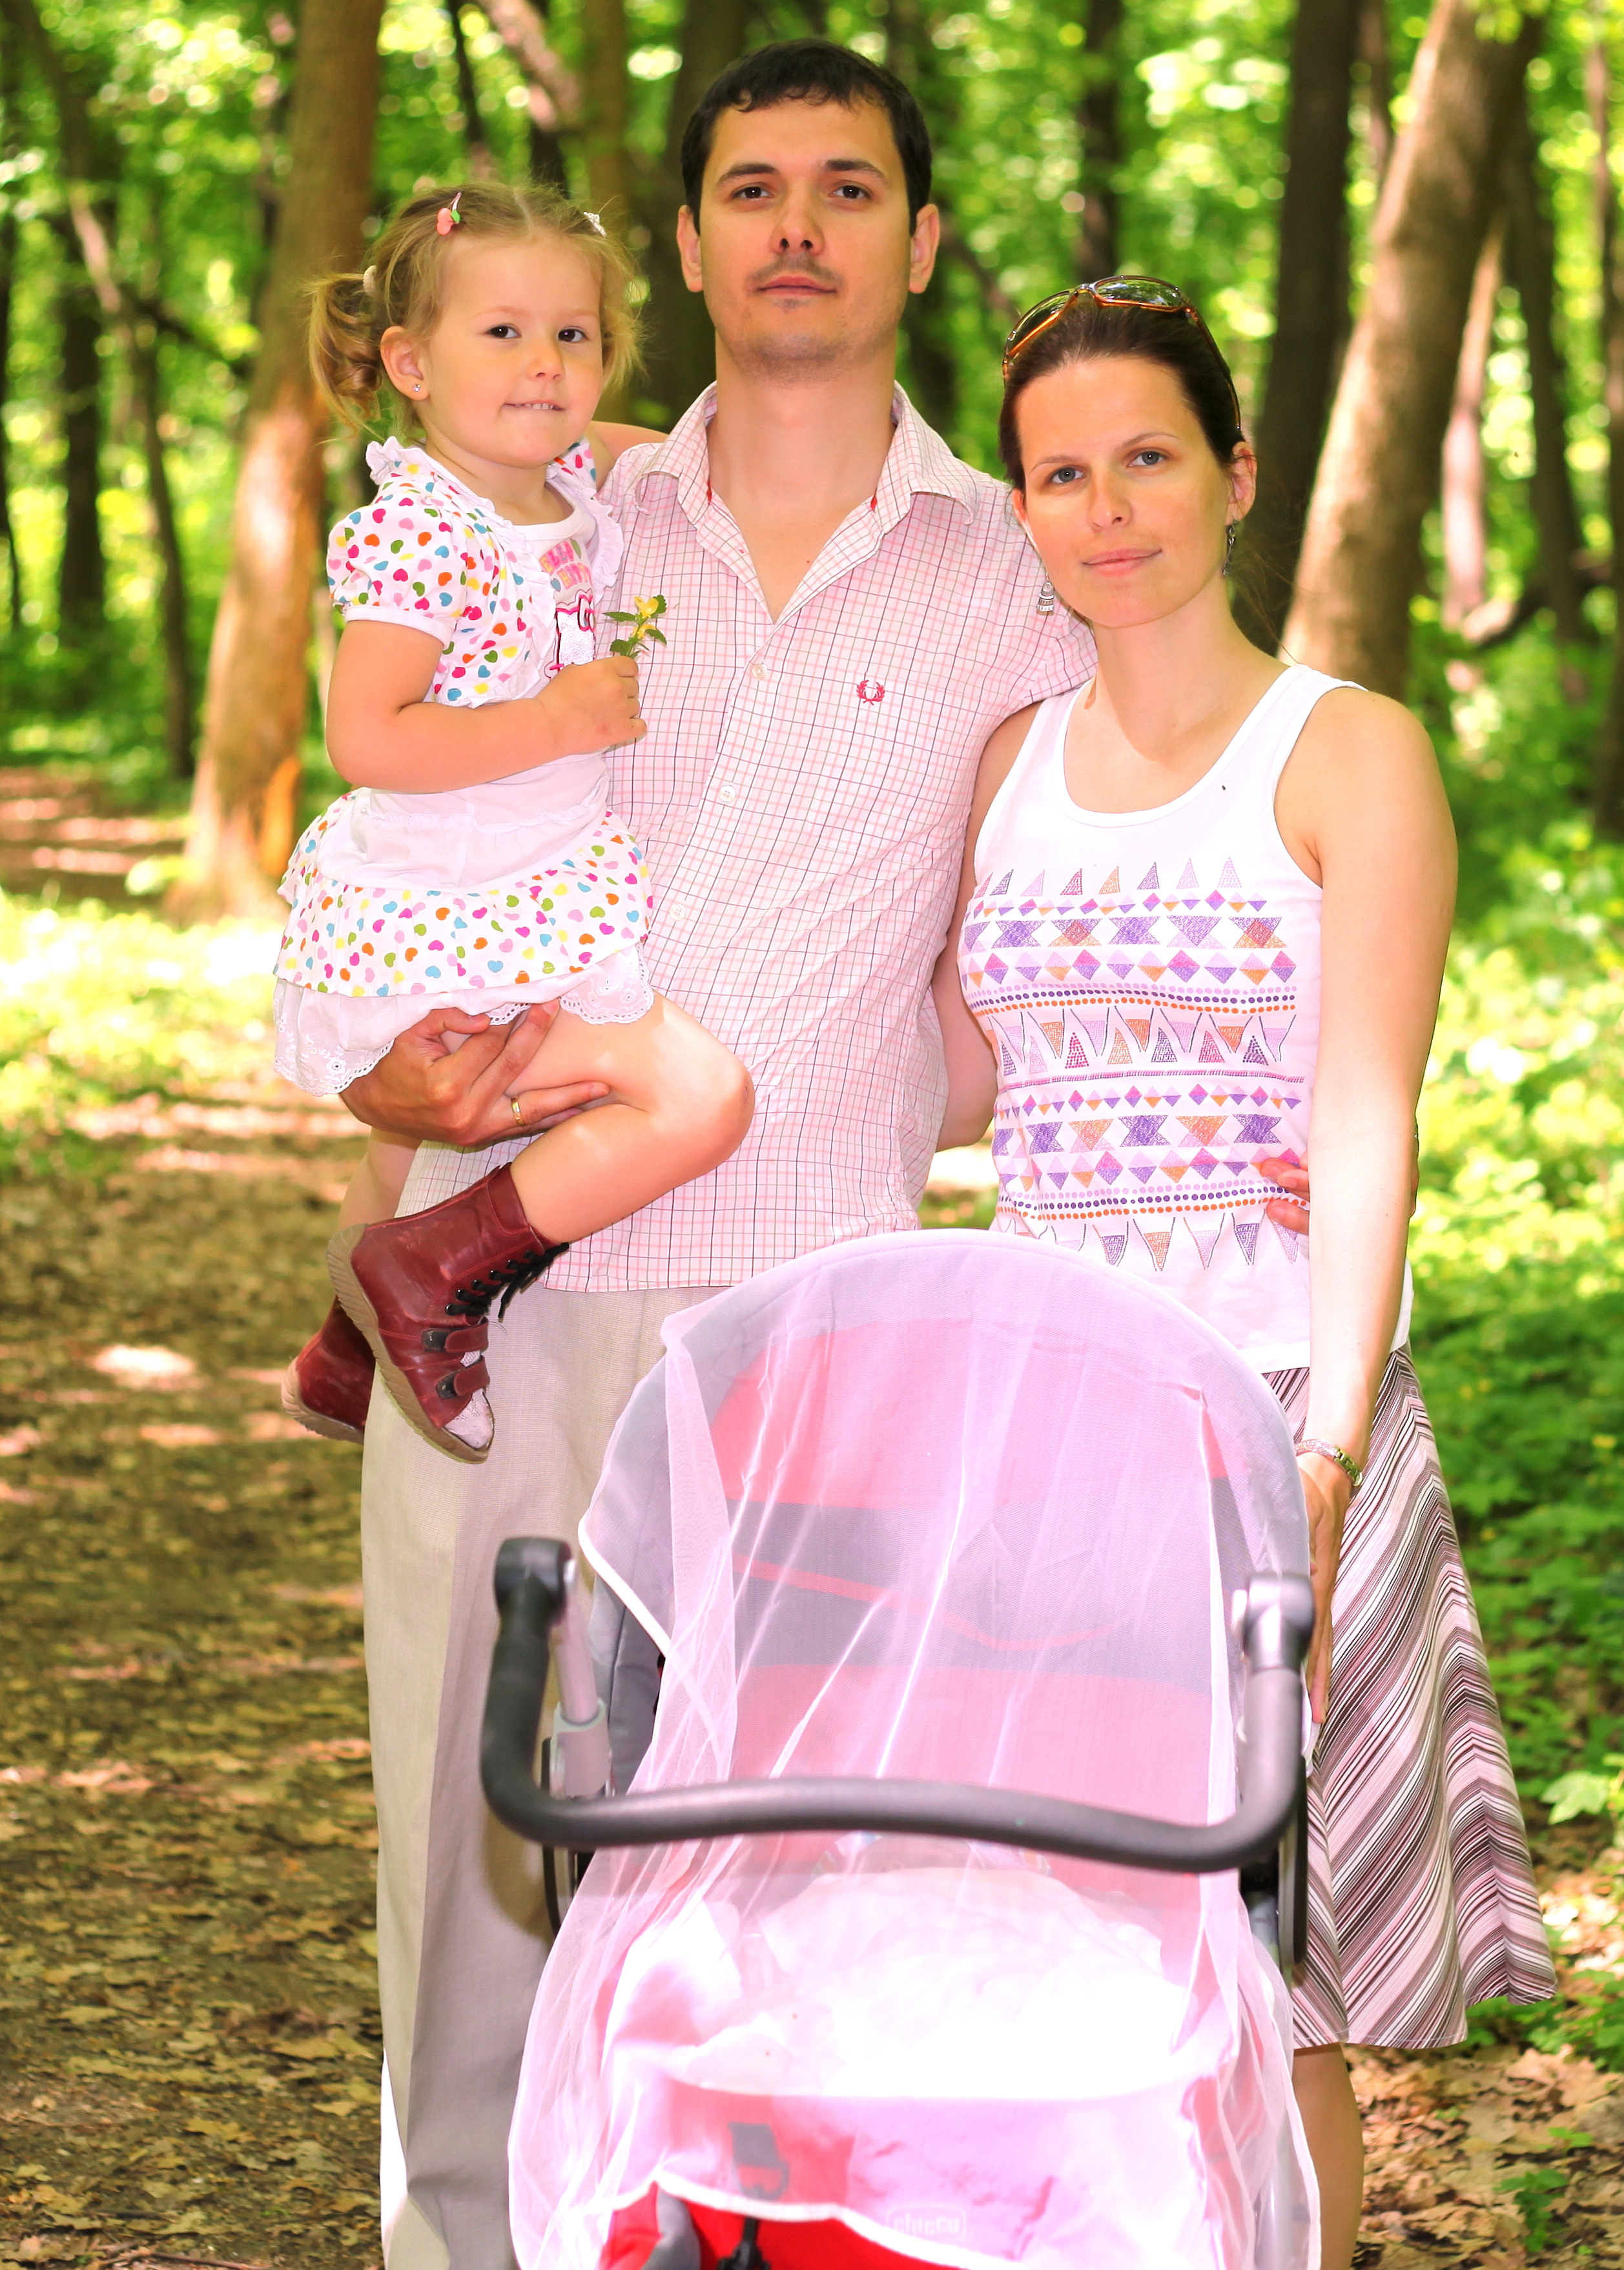 a beautiful Catholic family in a forest in May 2013